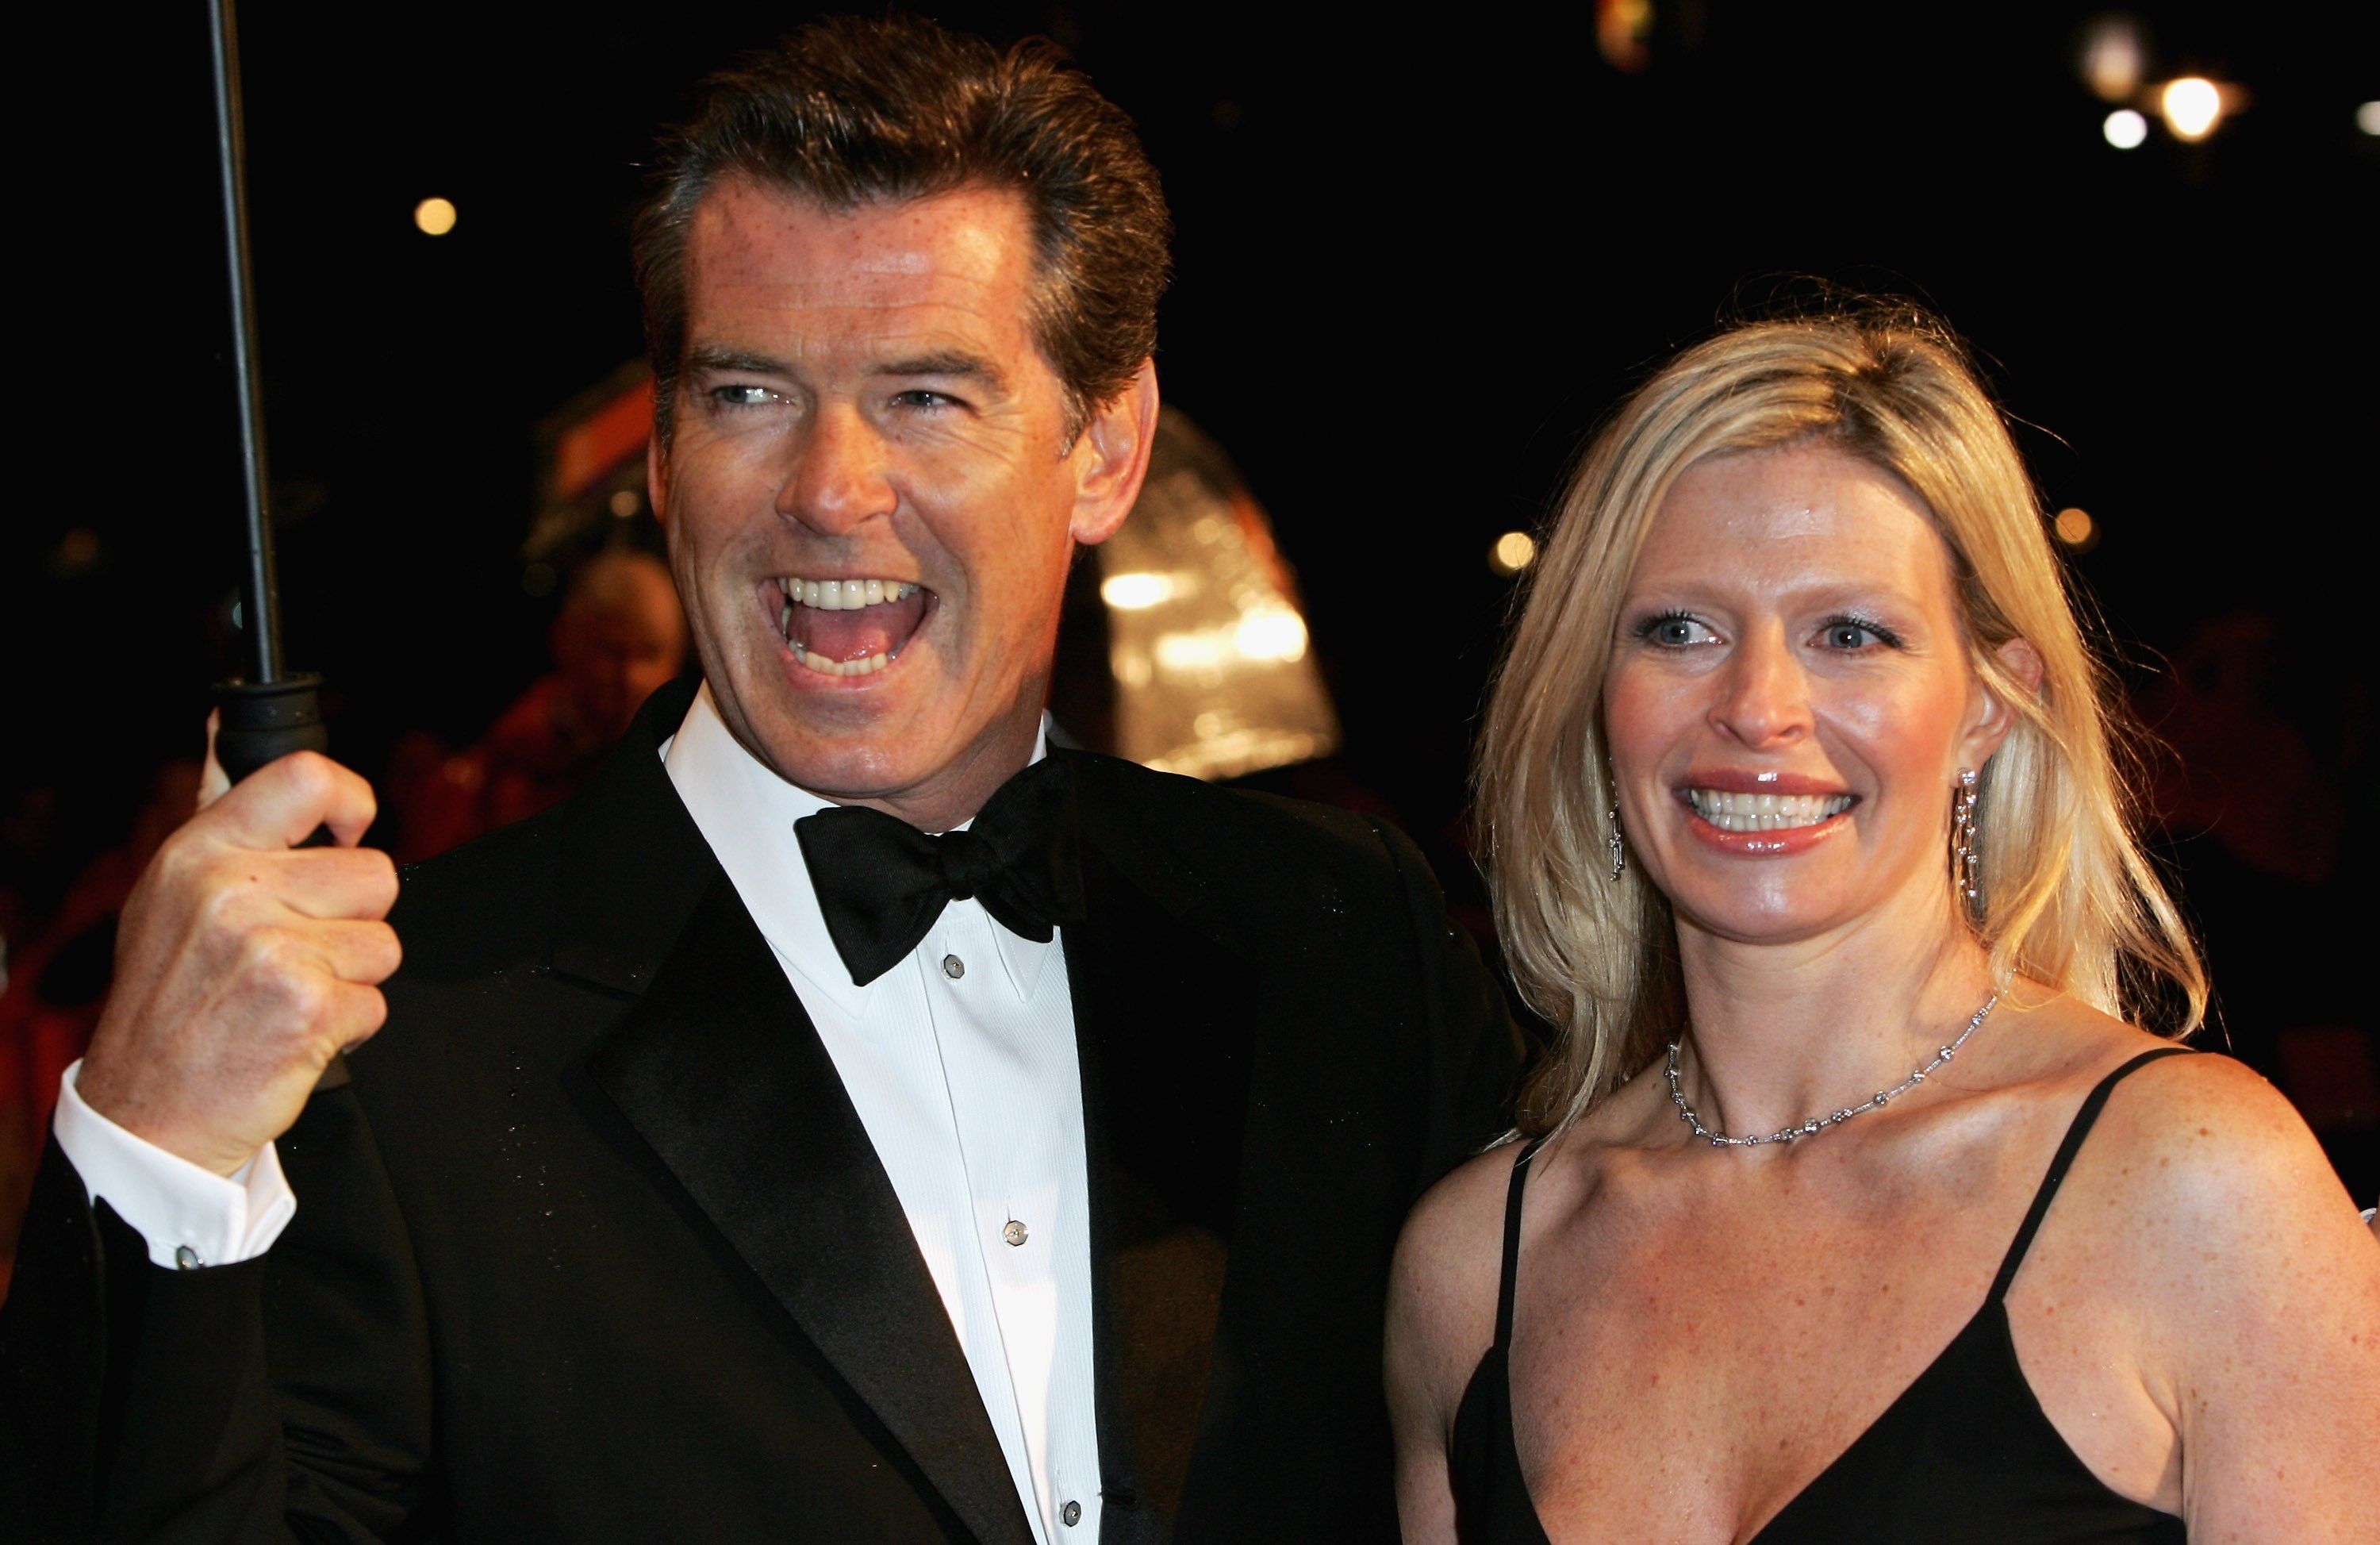  Pierce Brosnan and Charlotte Brosnan at The Orange British Academy Film Awards in 2006 in London | Source: Getty Images